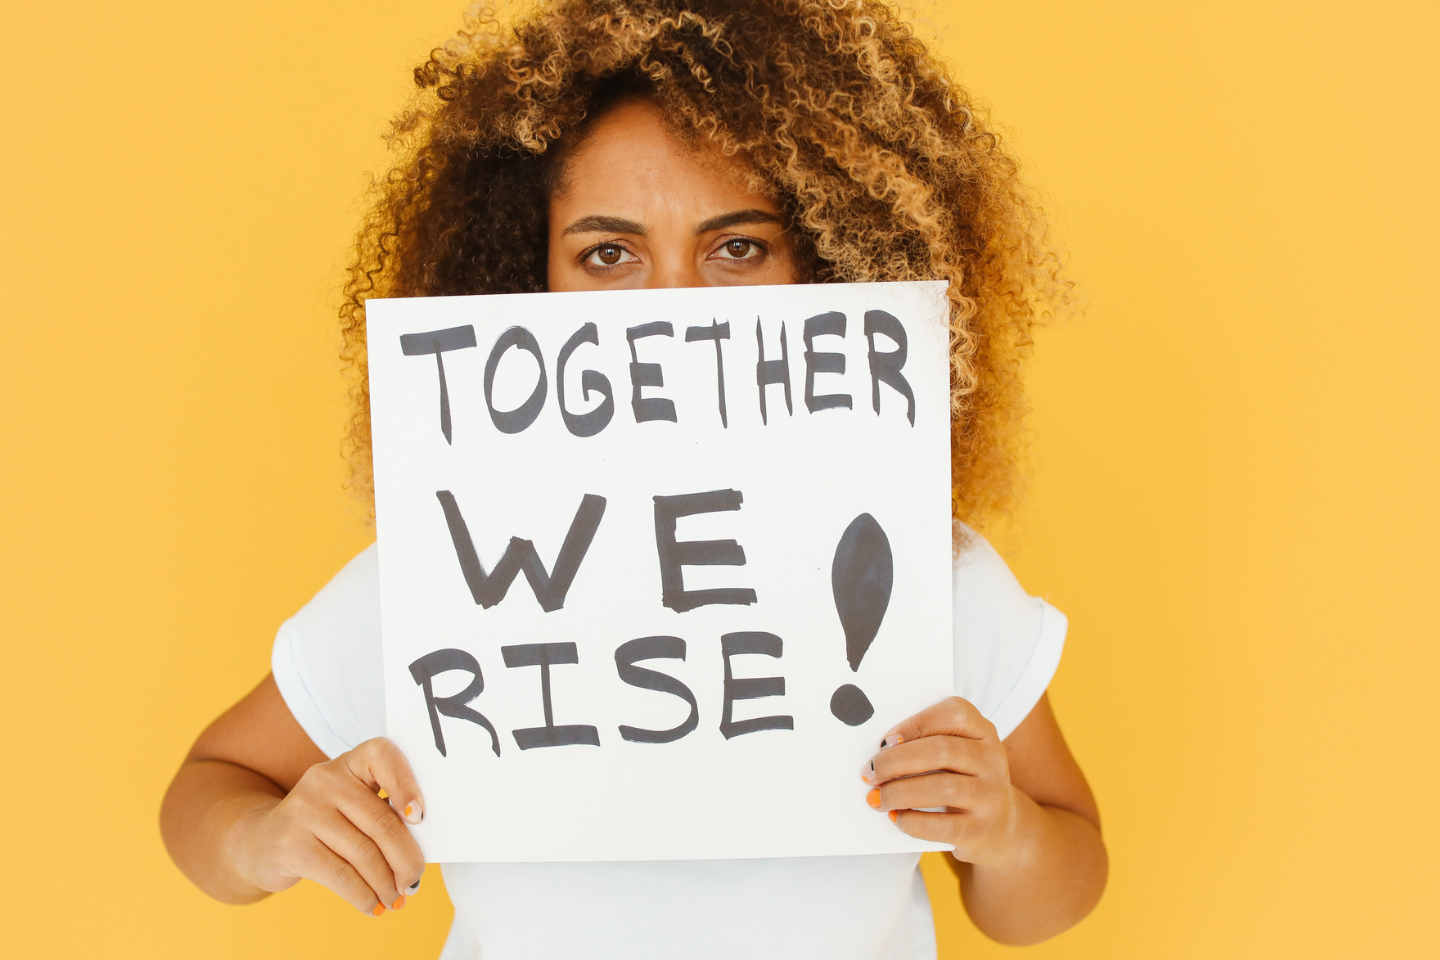 Female holding a sing in front of her face that reads "Together We Rise"